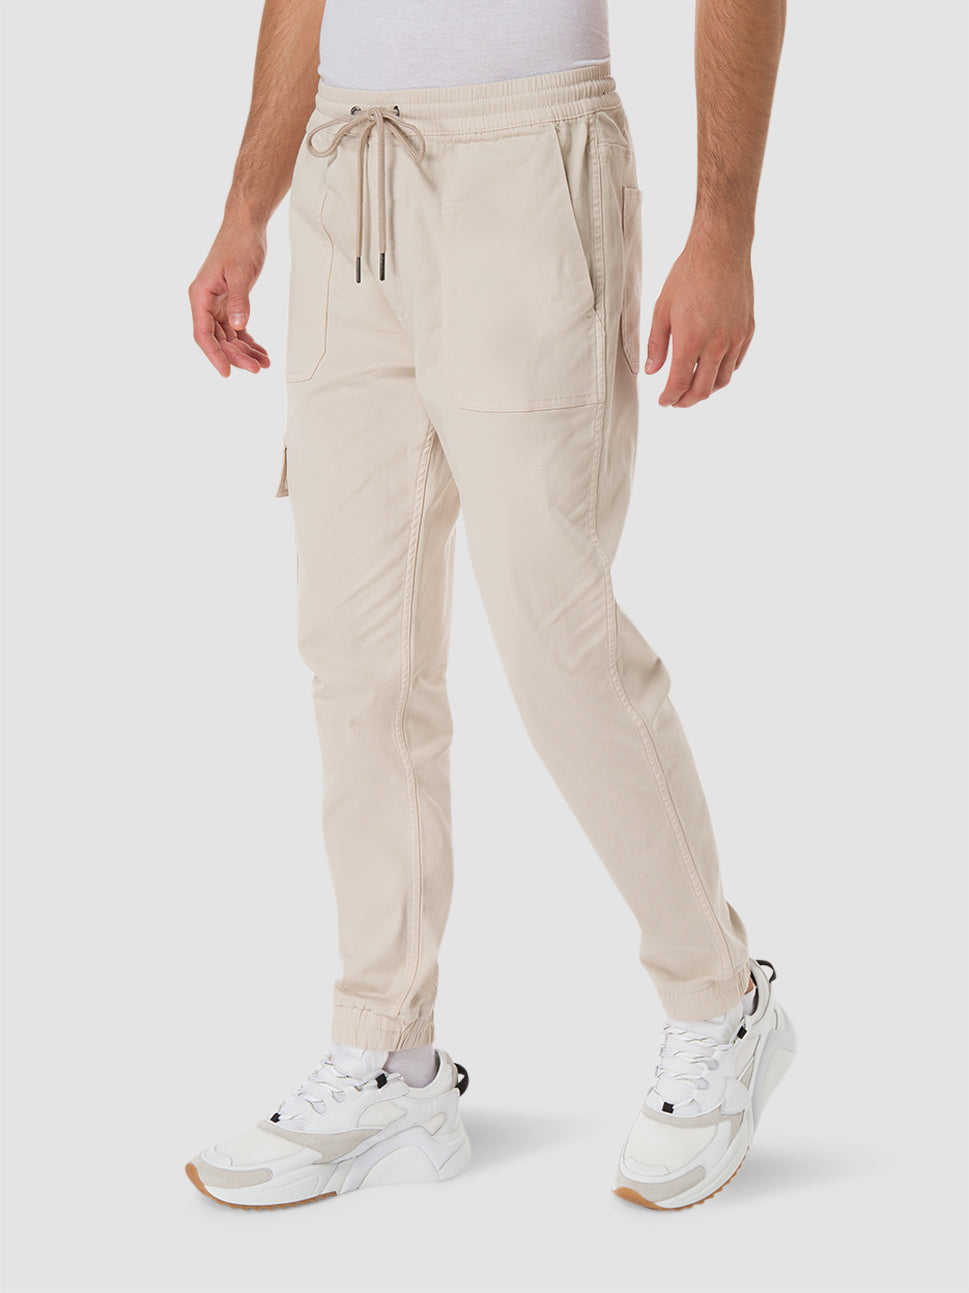 Joes Jeans Jogger Alabaster AW4DED8420